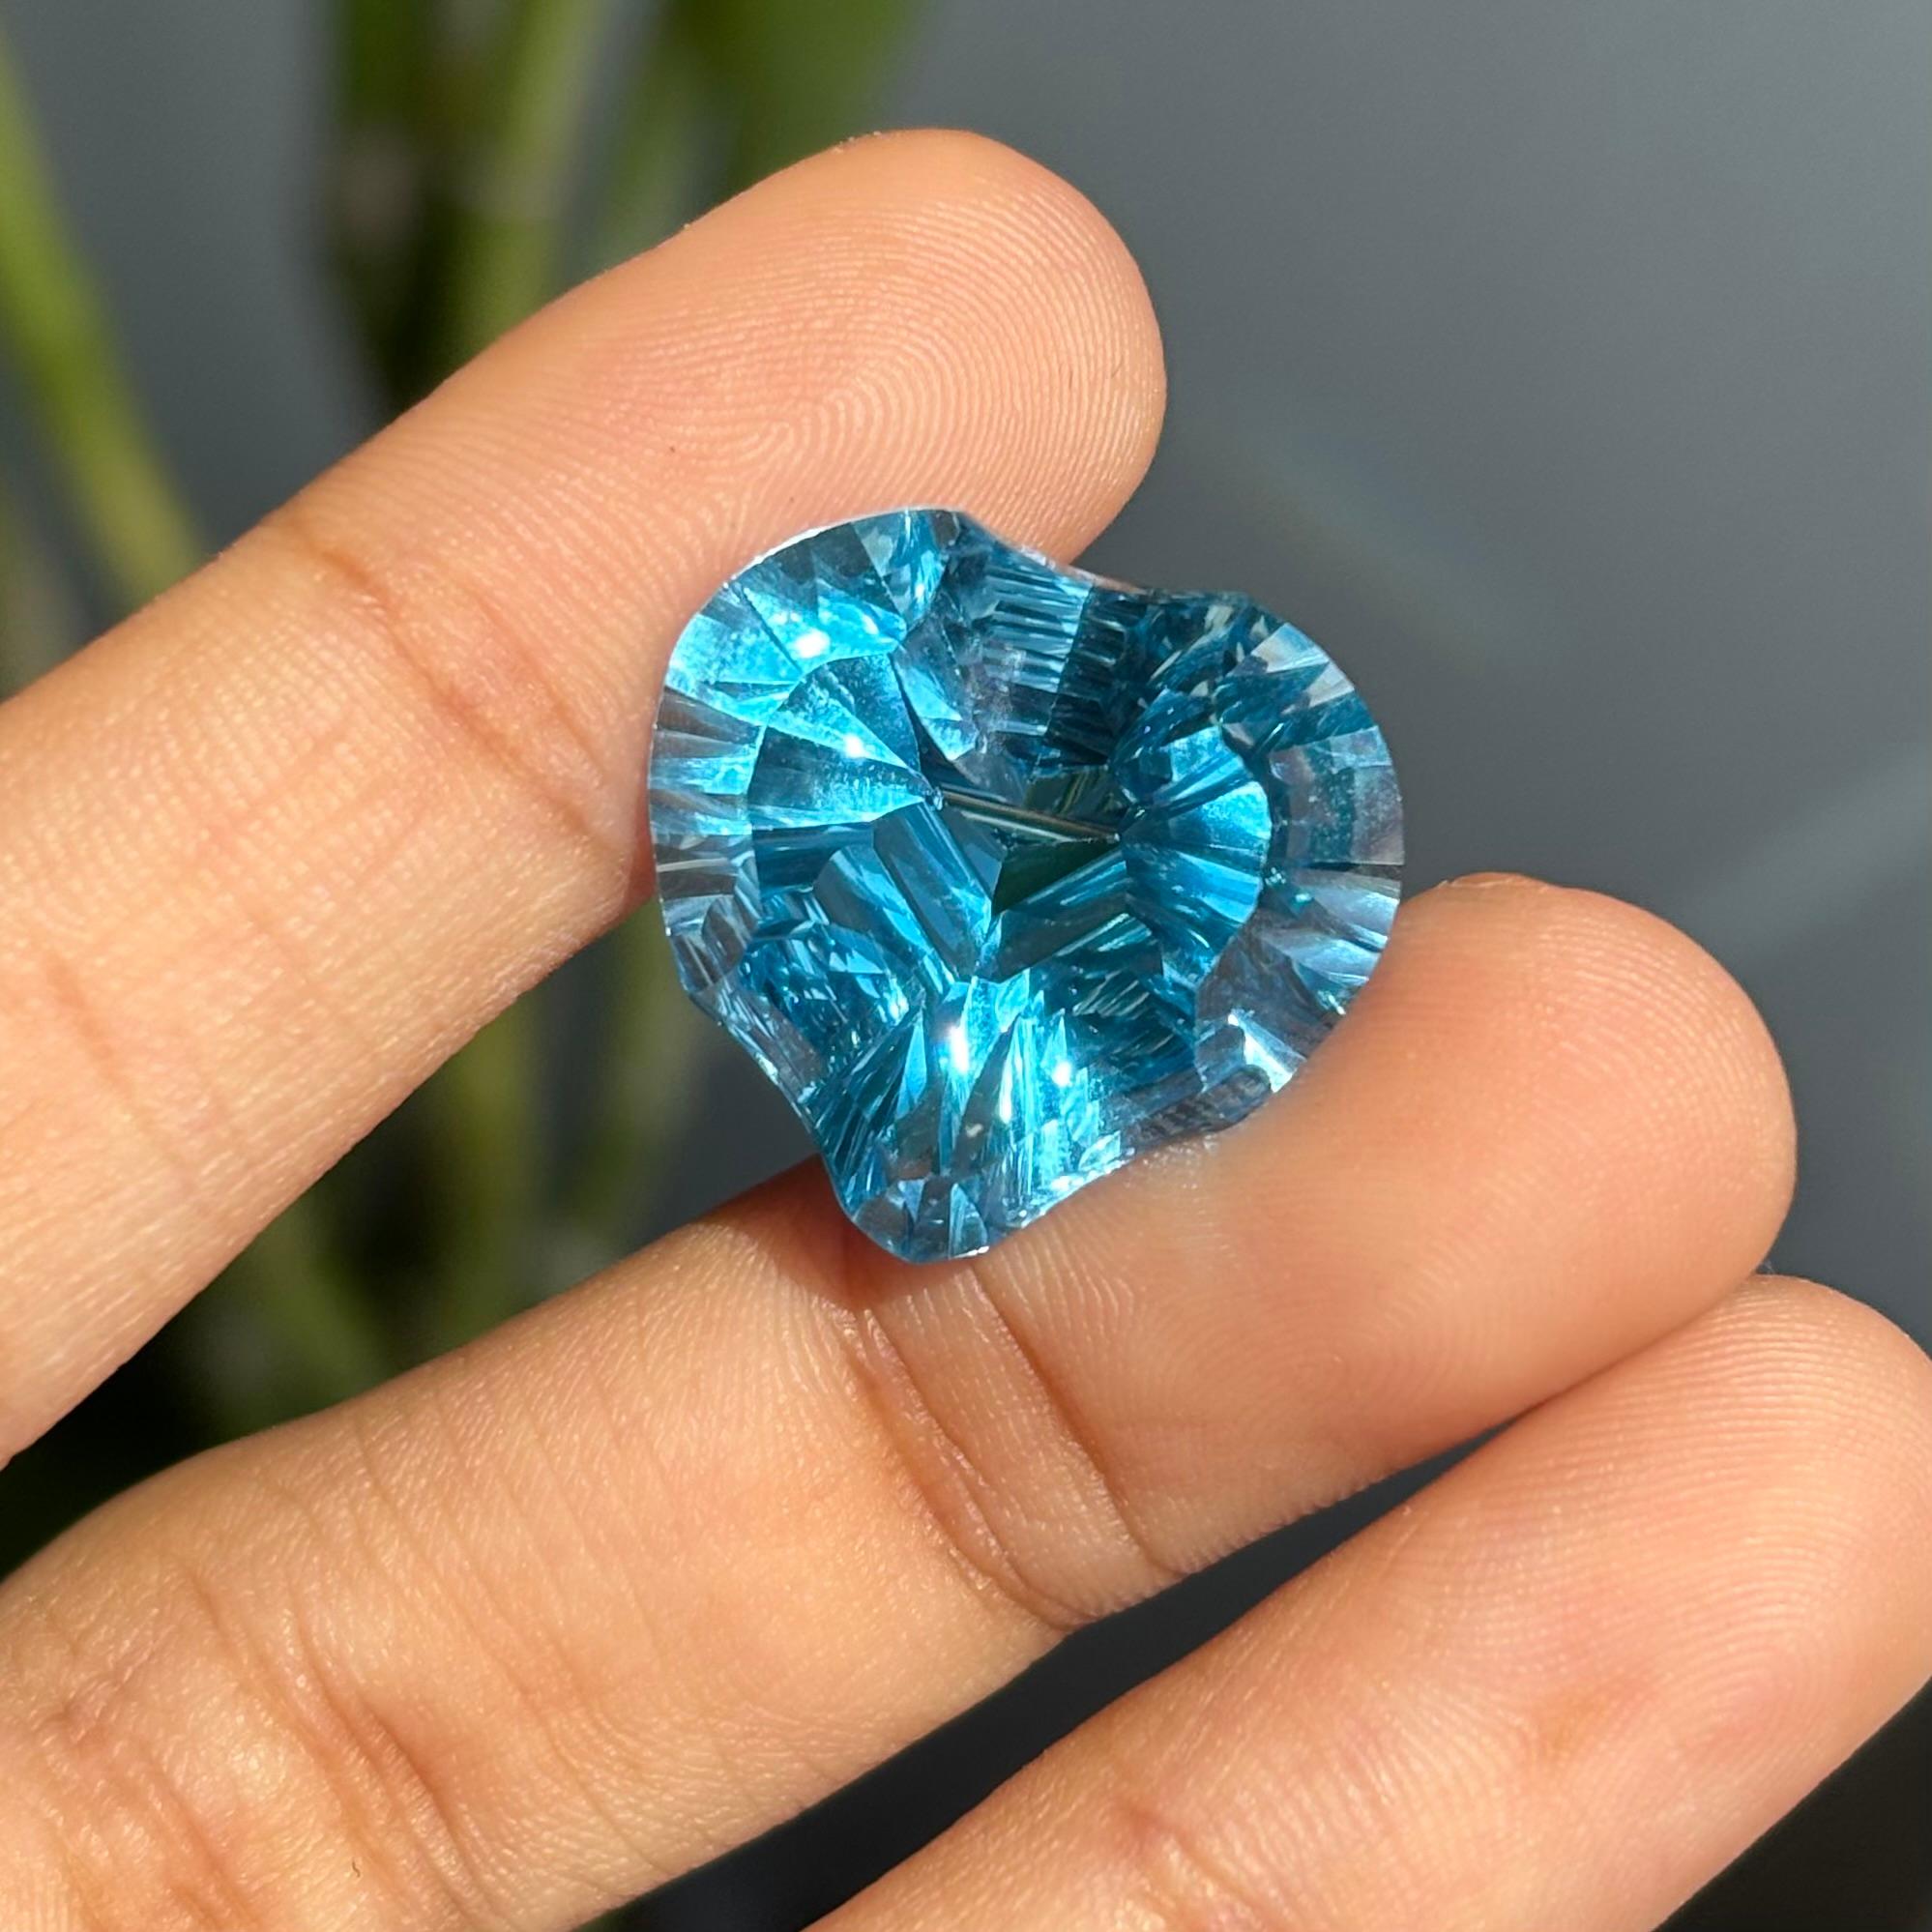 24.12 Carat Natural Blue Heart Shaped Topaz Stone For Sale 2